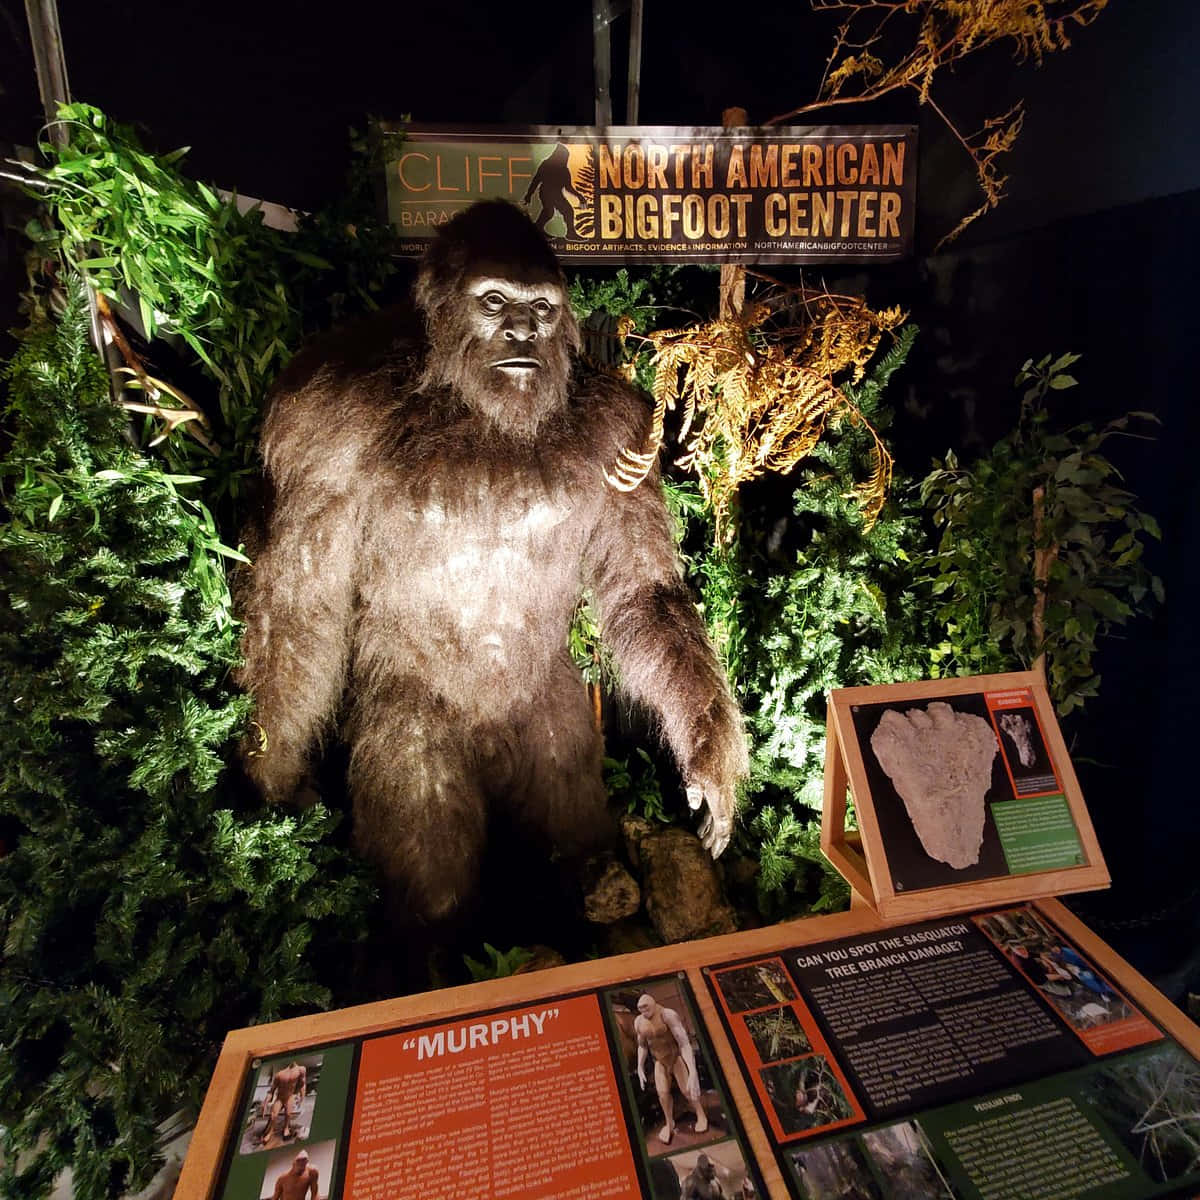 A Bigfoot Statue Is Displayed In A Museum